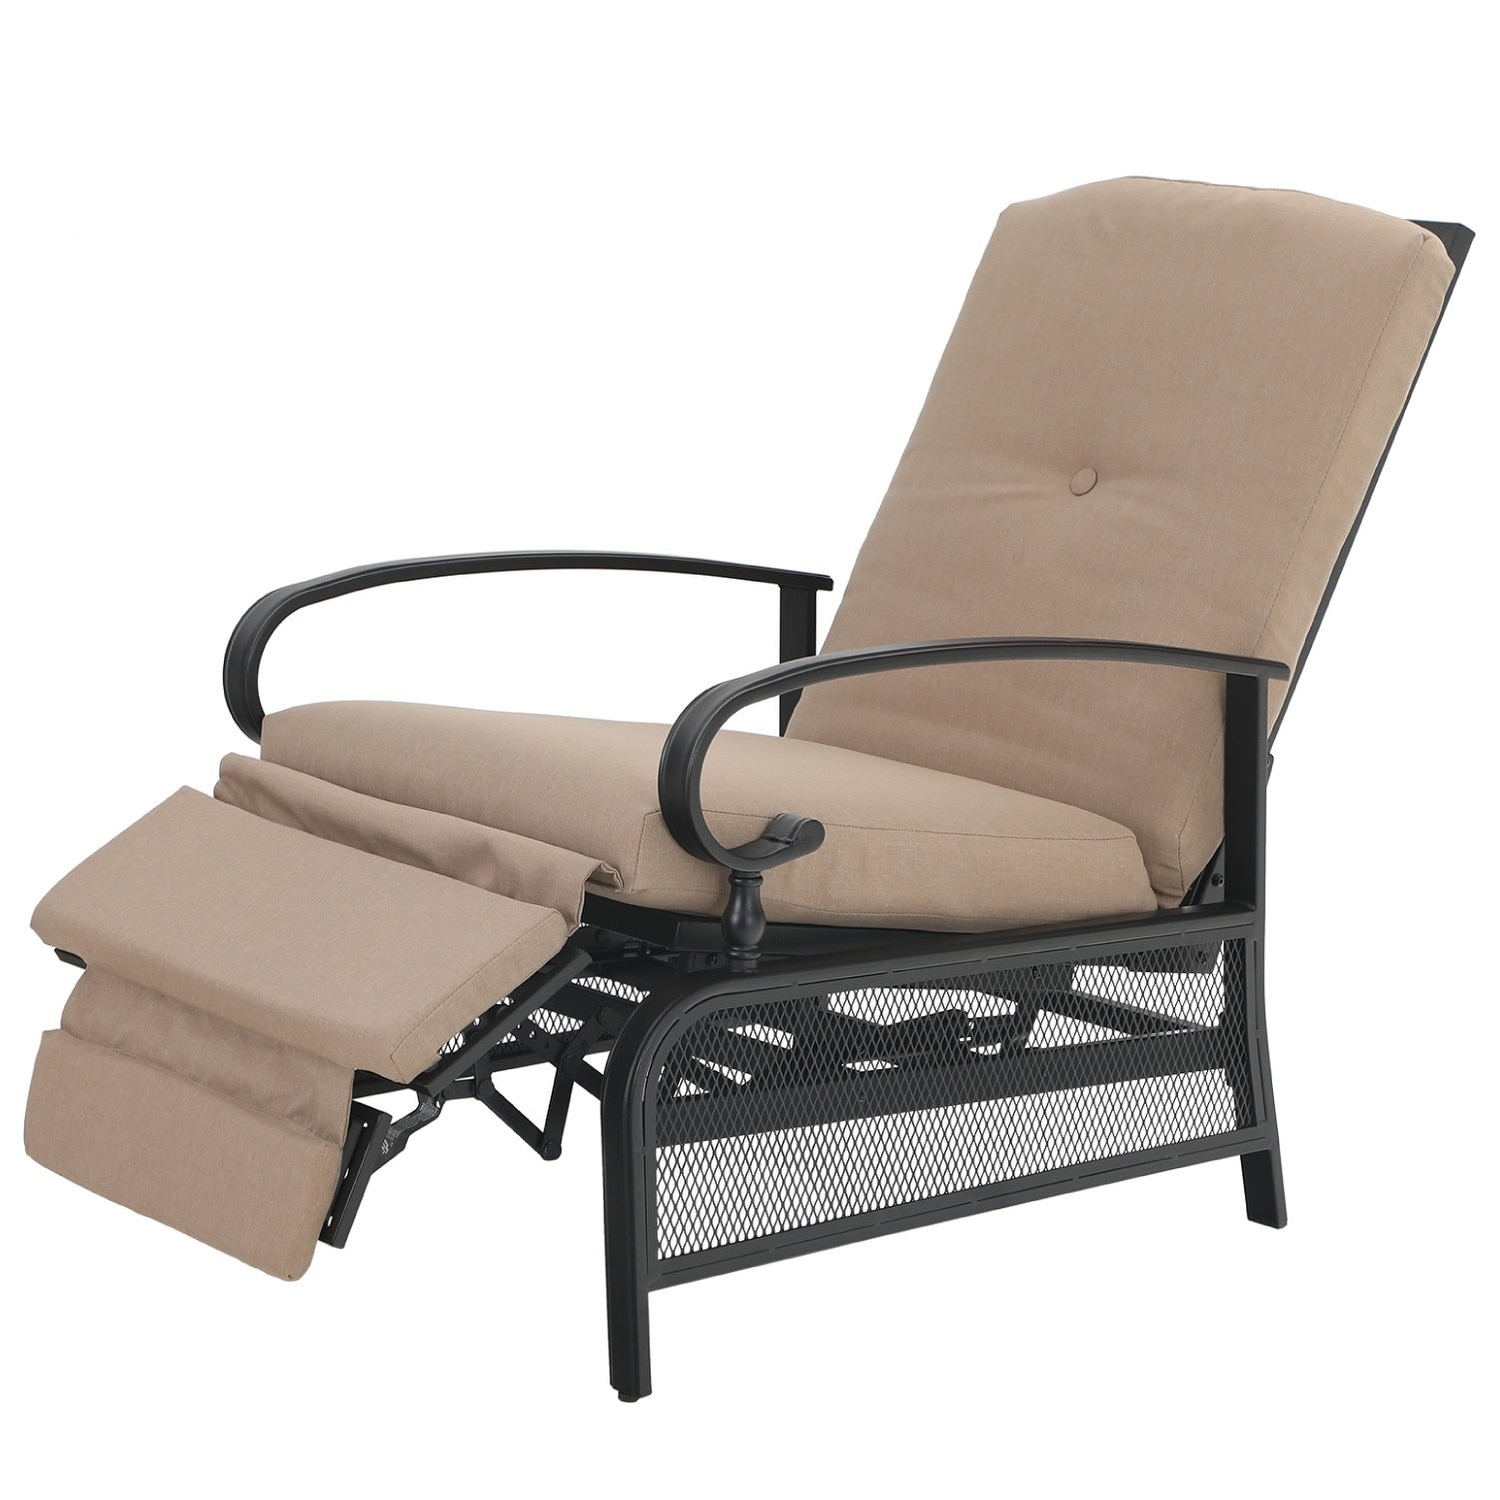 Outdoor Adjustable Cushioned Metal Patio Recliner Lounge Chair - On Sale -  Bed Bath & Beyond - 30355005